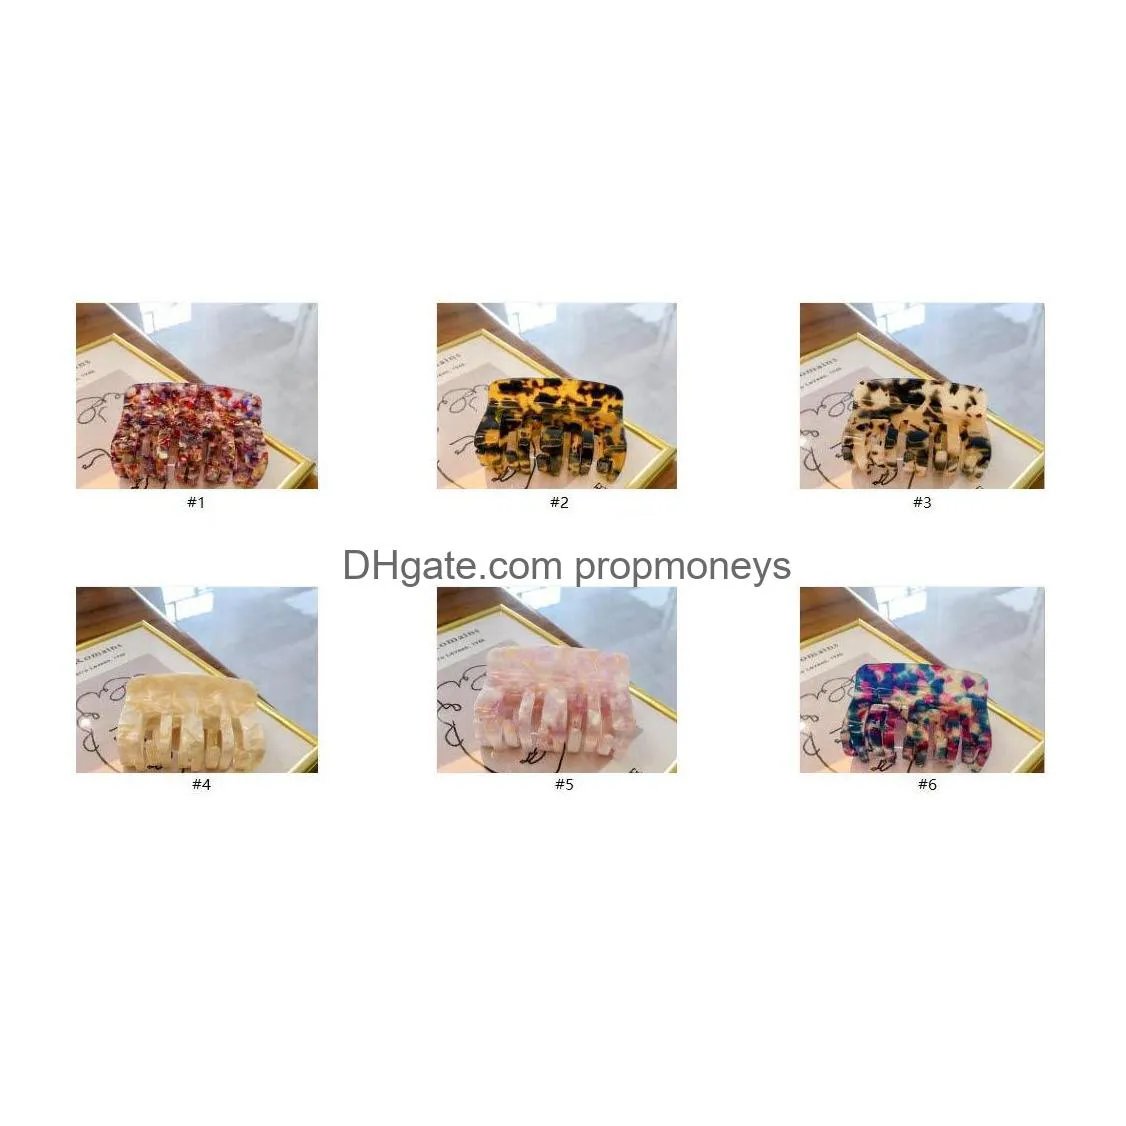 Hair Accessories Korean Geometric Acetate Leopard Hairpins Women Large Square Hair Claw Clips Resin Clamp Catch Vintage Accessories Ba Dhymv